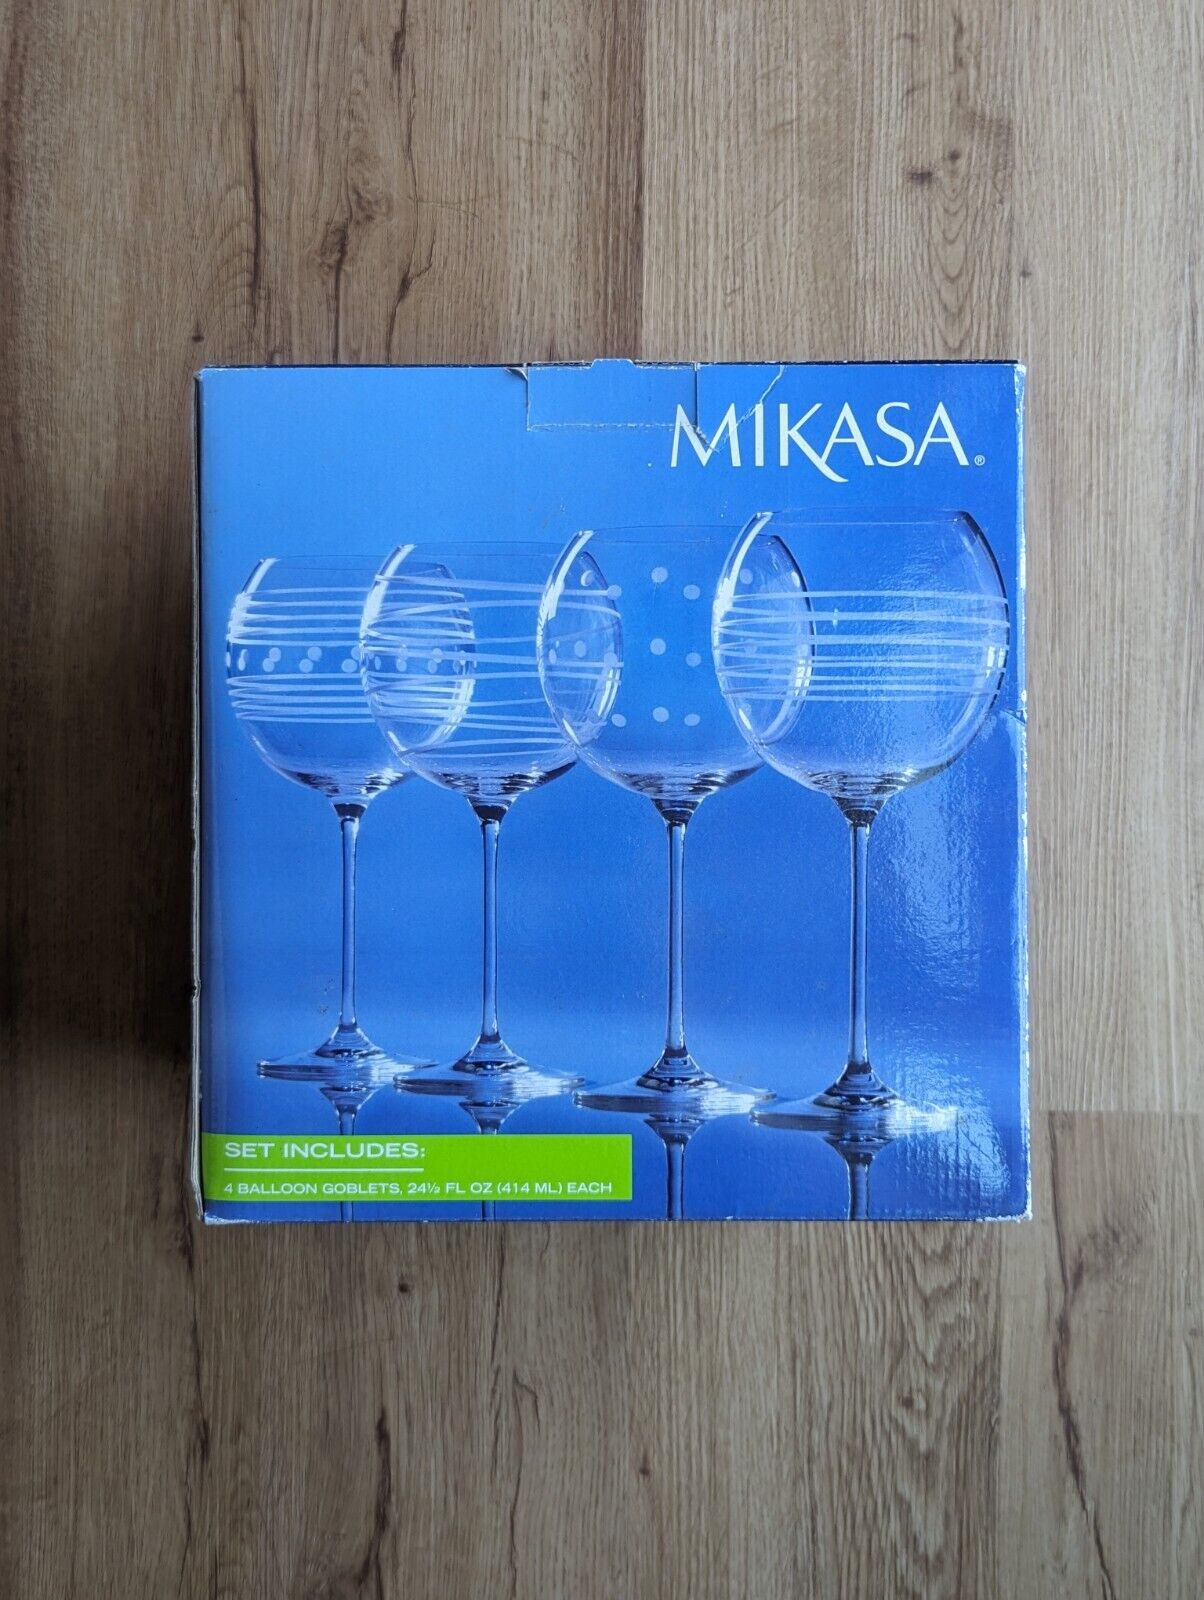 MIKASA Cheers Balloon Goblet WINE Glasses 24 oz Clear Etched Glass Set of 4 NEW